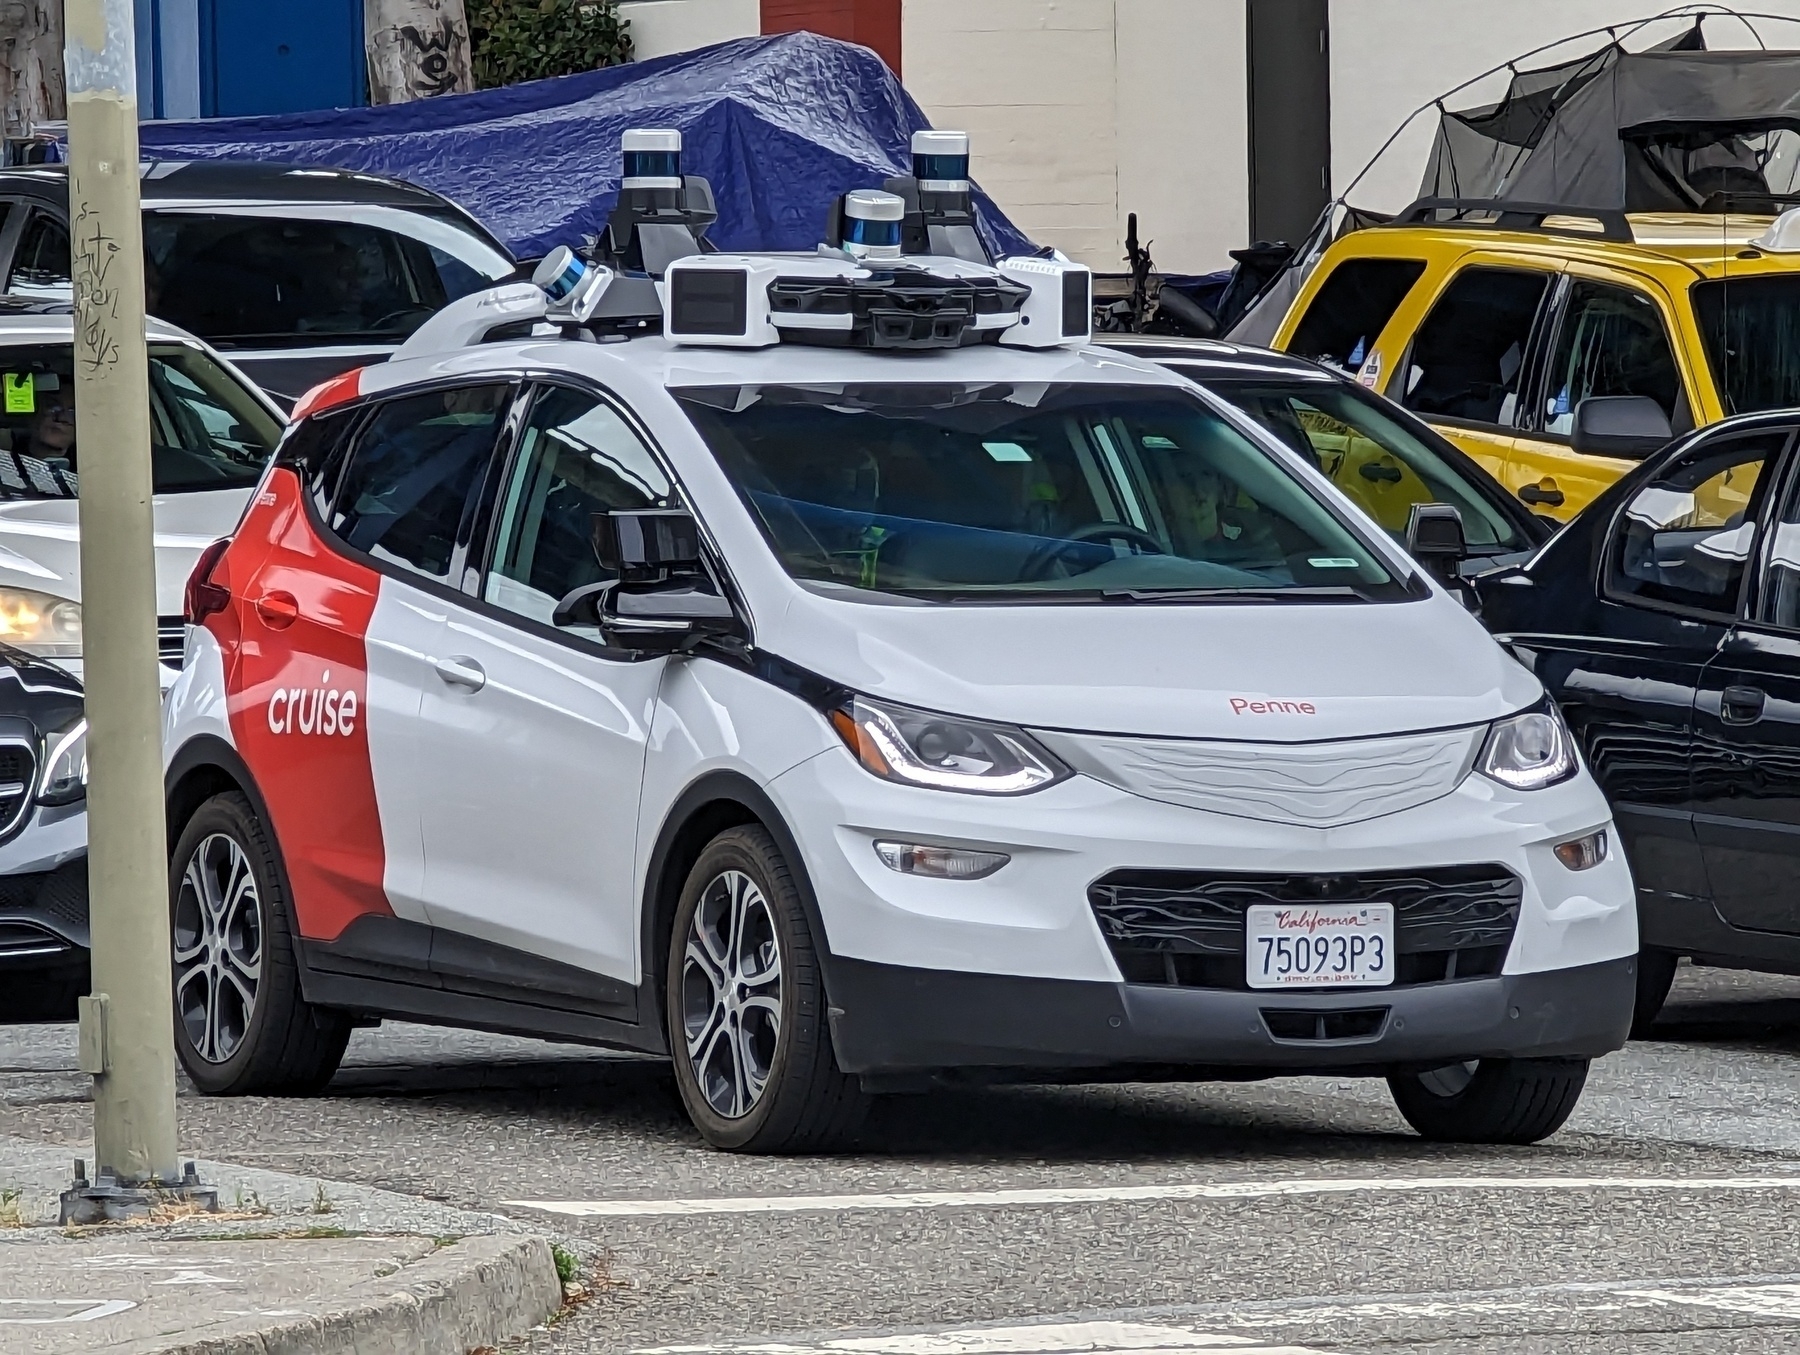 A driverless Cruise car, a compact white four door sedan with a roof almost completely covered in cameras and mounted sensors, waits for a green light Friday, May 5, 2023 in northbound Portrero Avenue lanes at Division Street in San Francisco, California. On sidewalks behind and beyond the car, blue plastic sheeting and thin metal poles tied to gray nylon fabric show separate tents unsheltered city residents have set up.